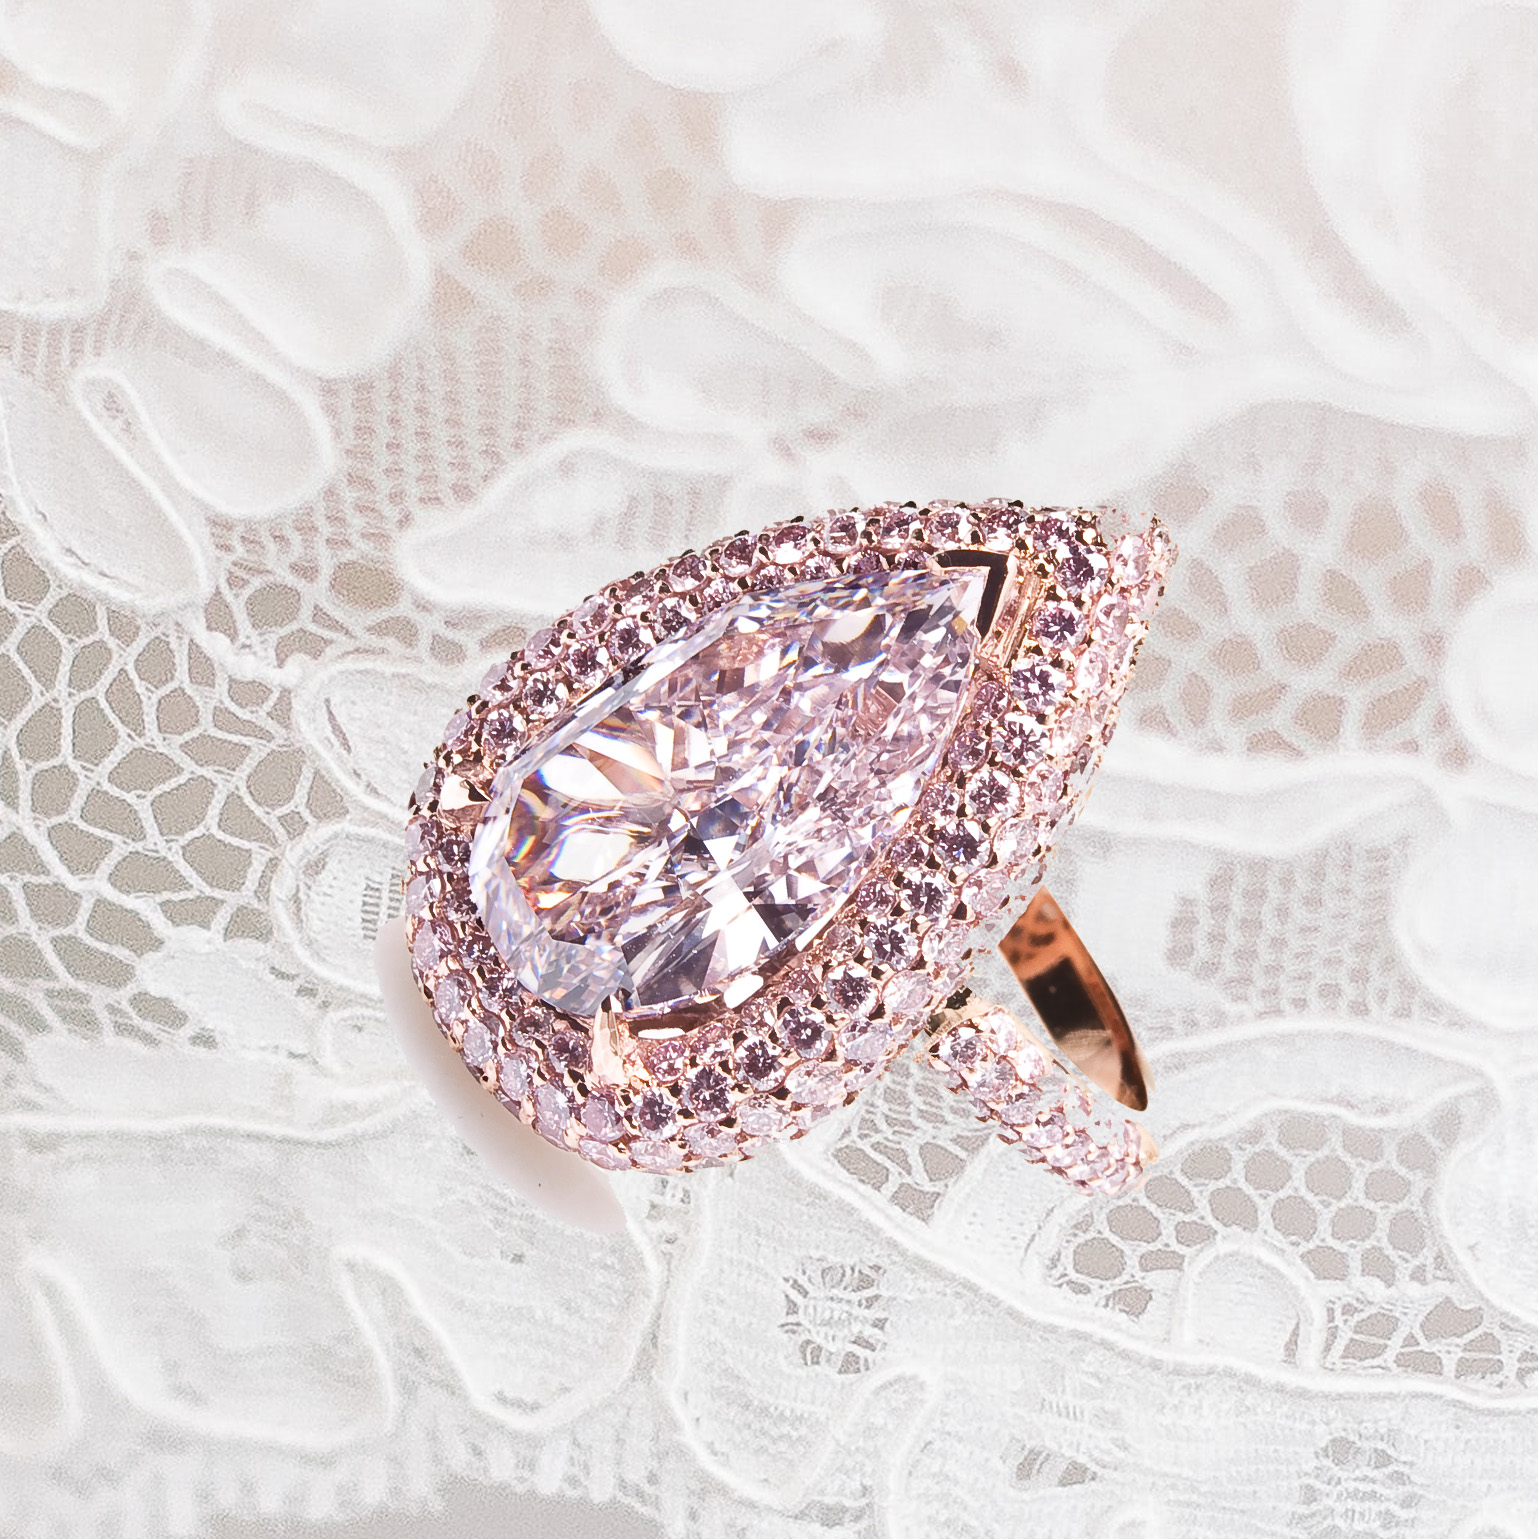 The Perfect engagement ring. Romantic and with pink diamonds. Credit YDCDL